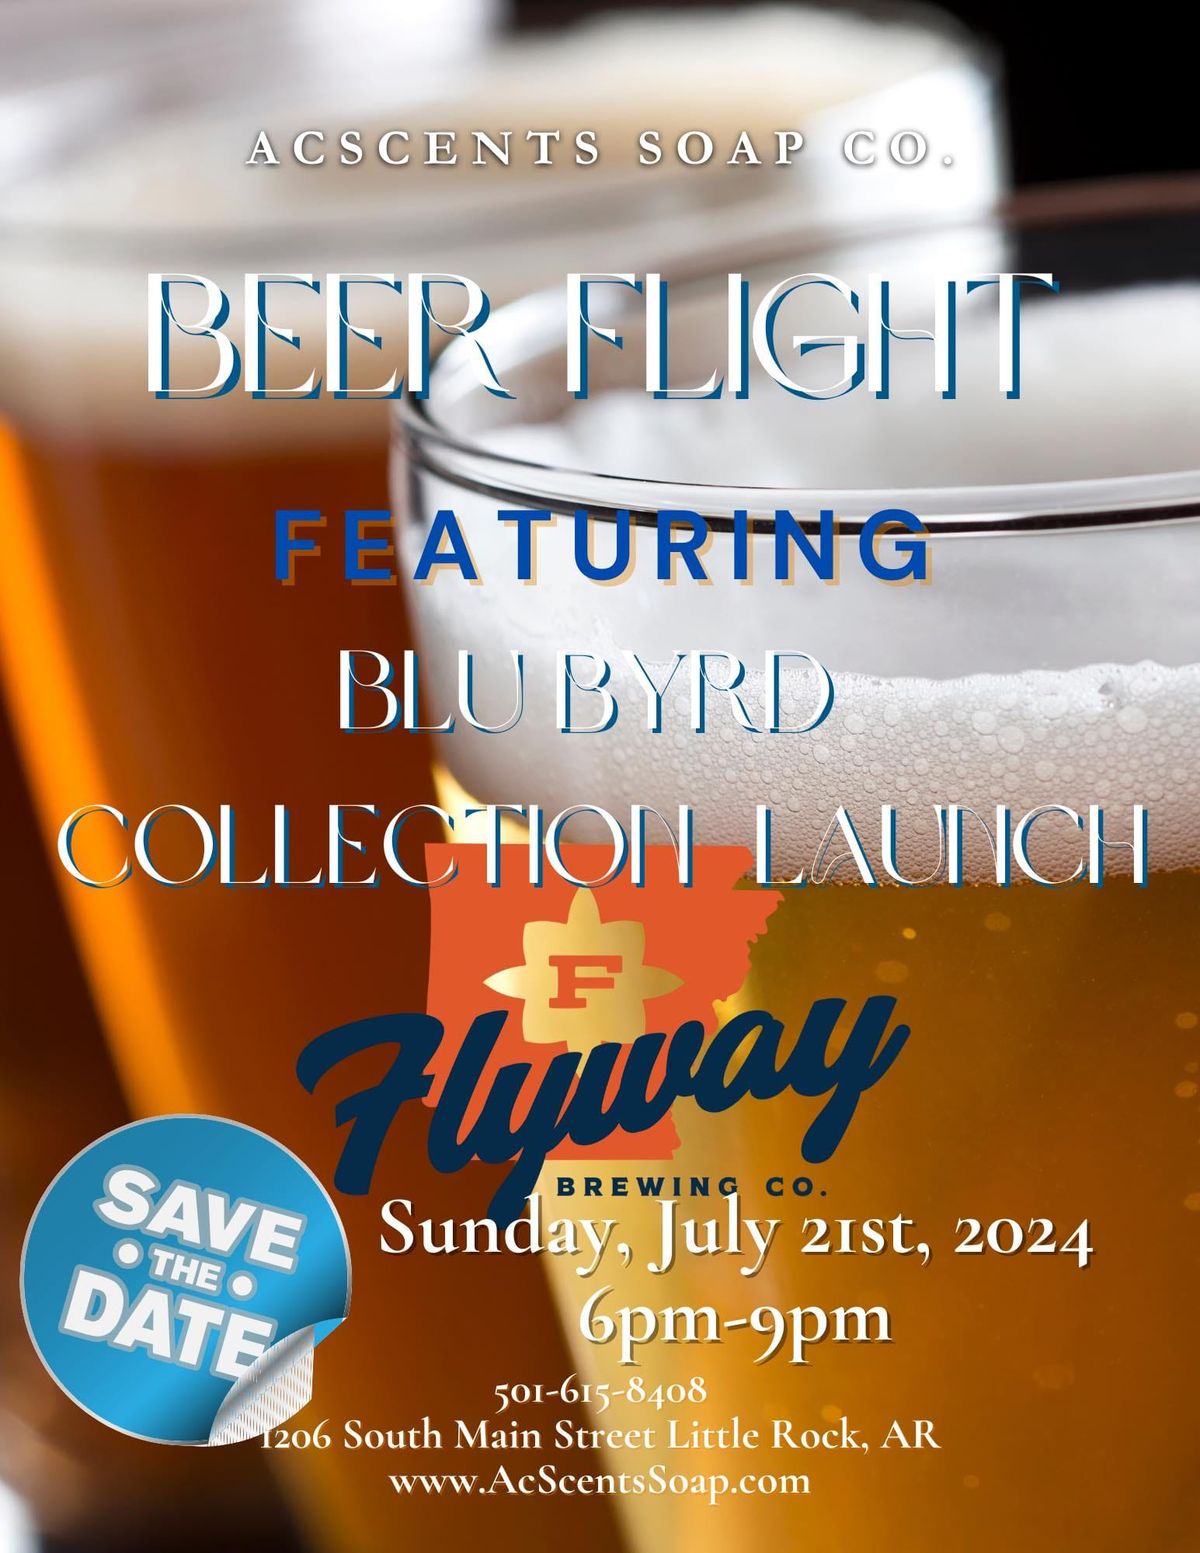 Beer Flight ft. Blu Byrd Collection Launch  